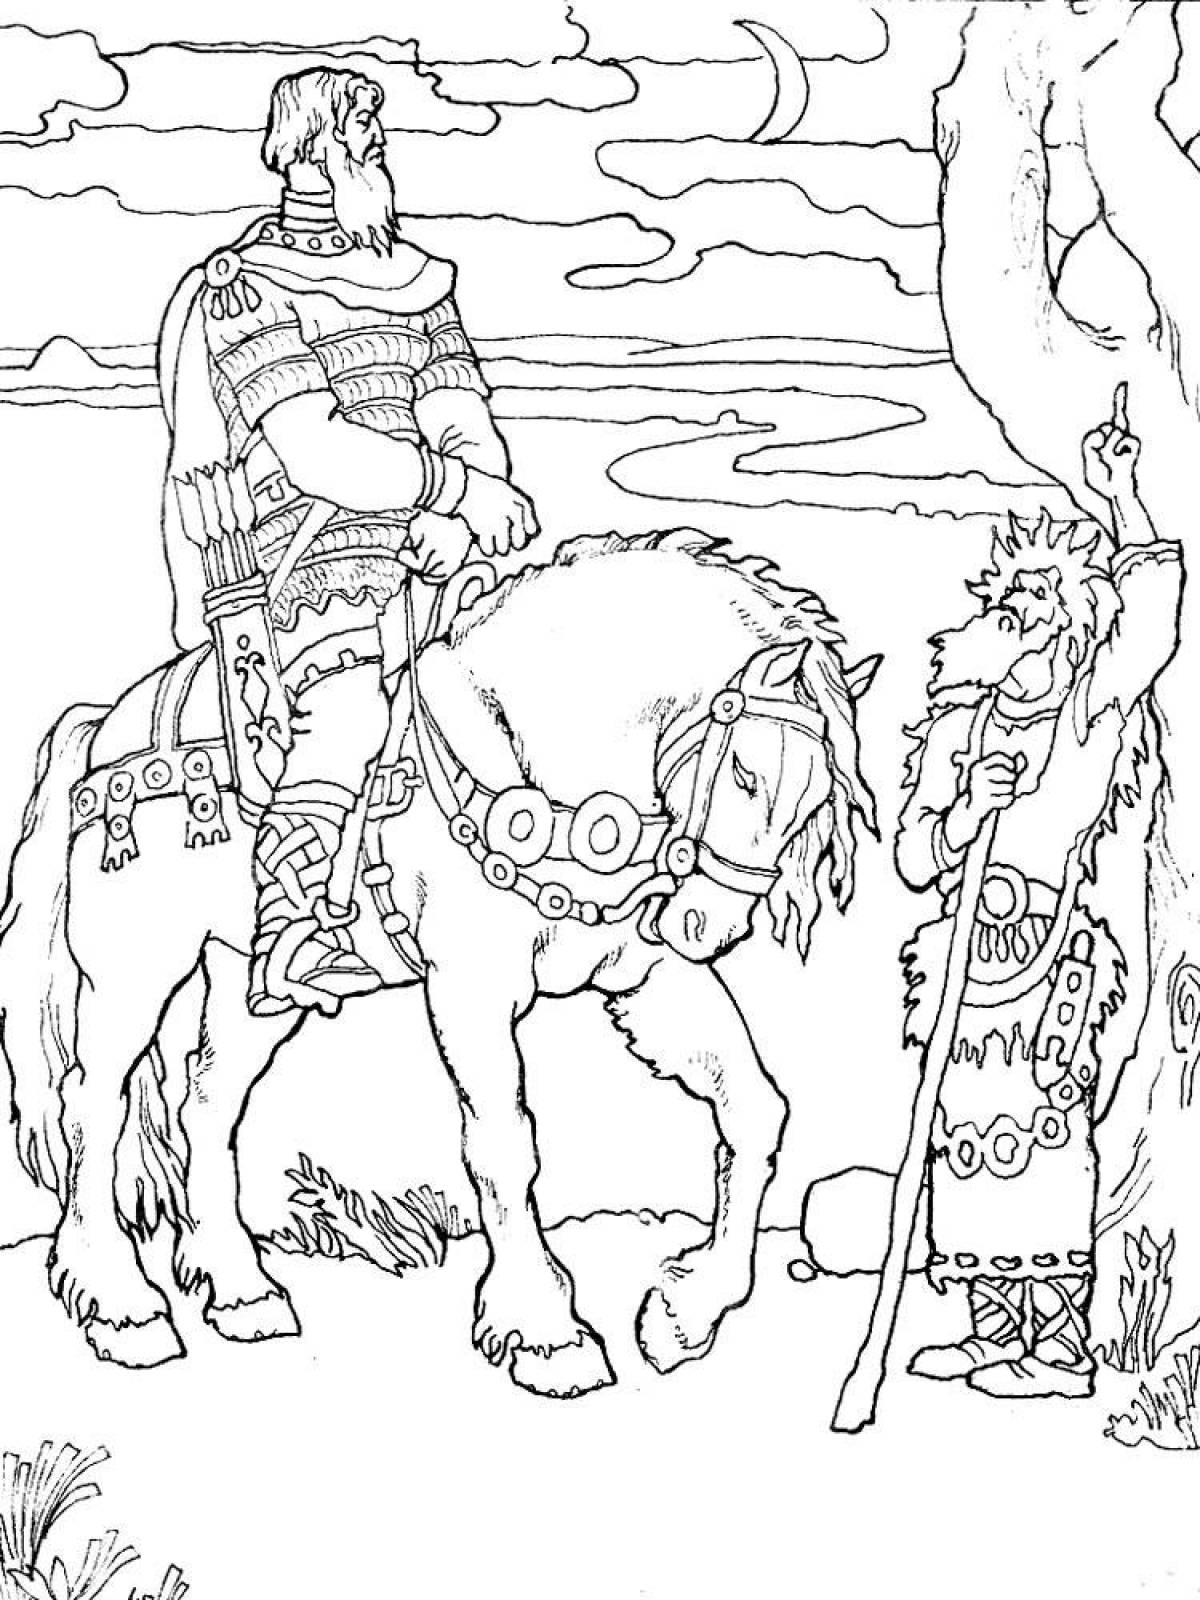 A fascinating coloring book of Russian bogatyrs for children